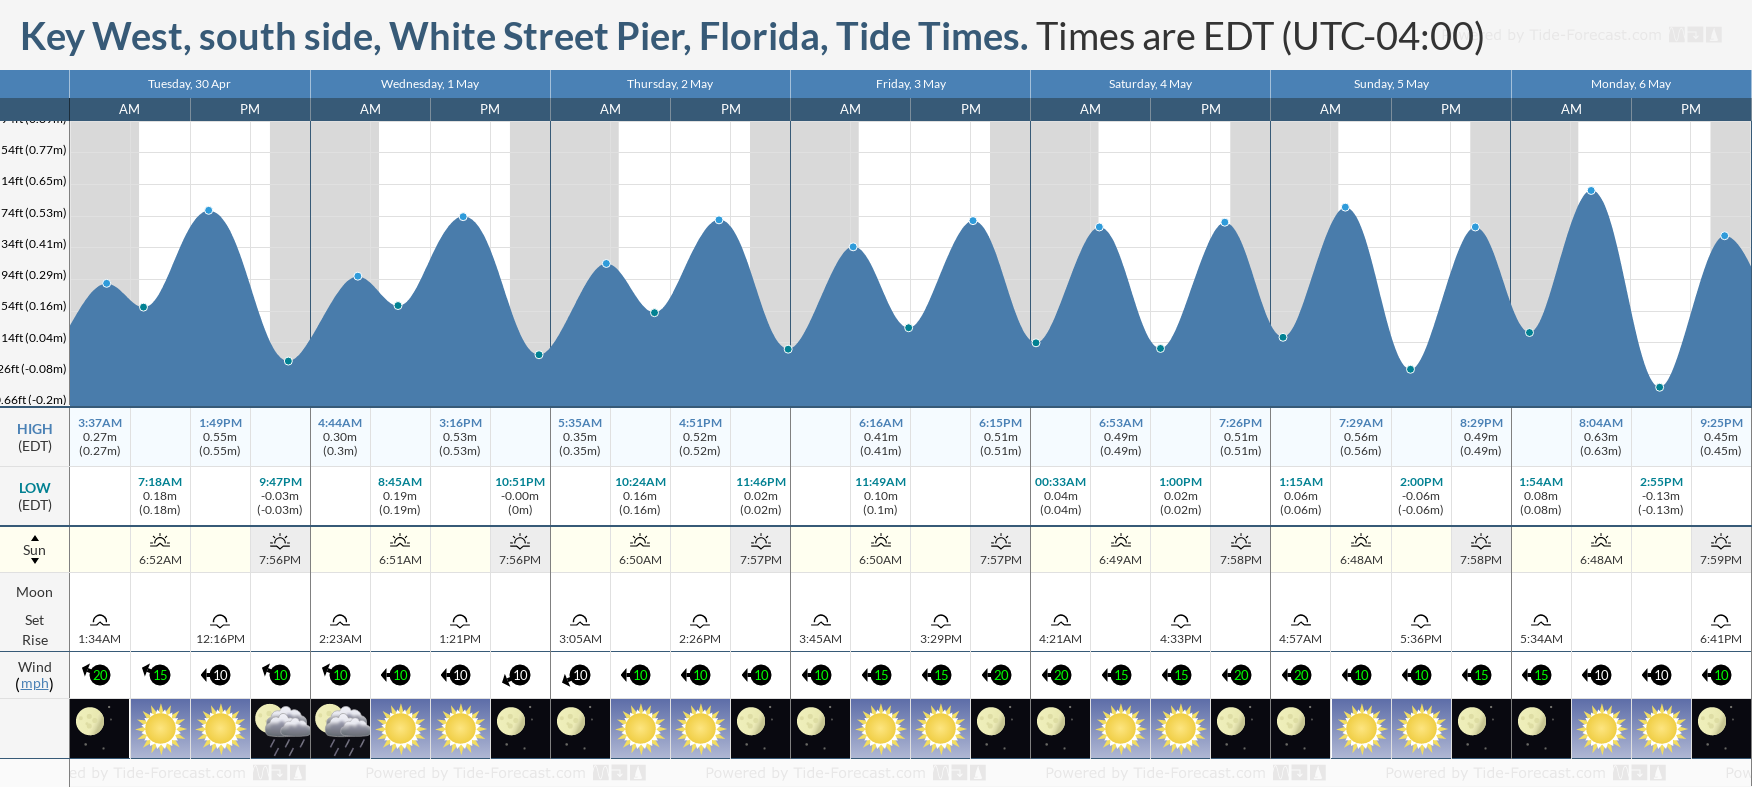 Key West, south side, White Street Pier, Florida Tide Chart including high and low tide tide times for the next 7 days